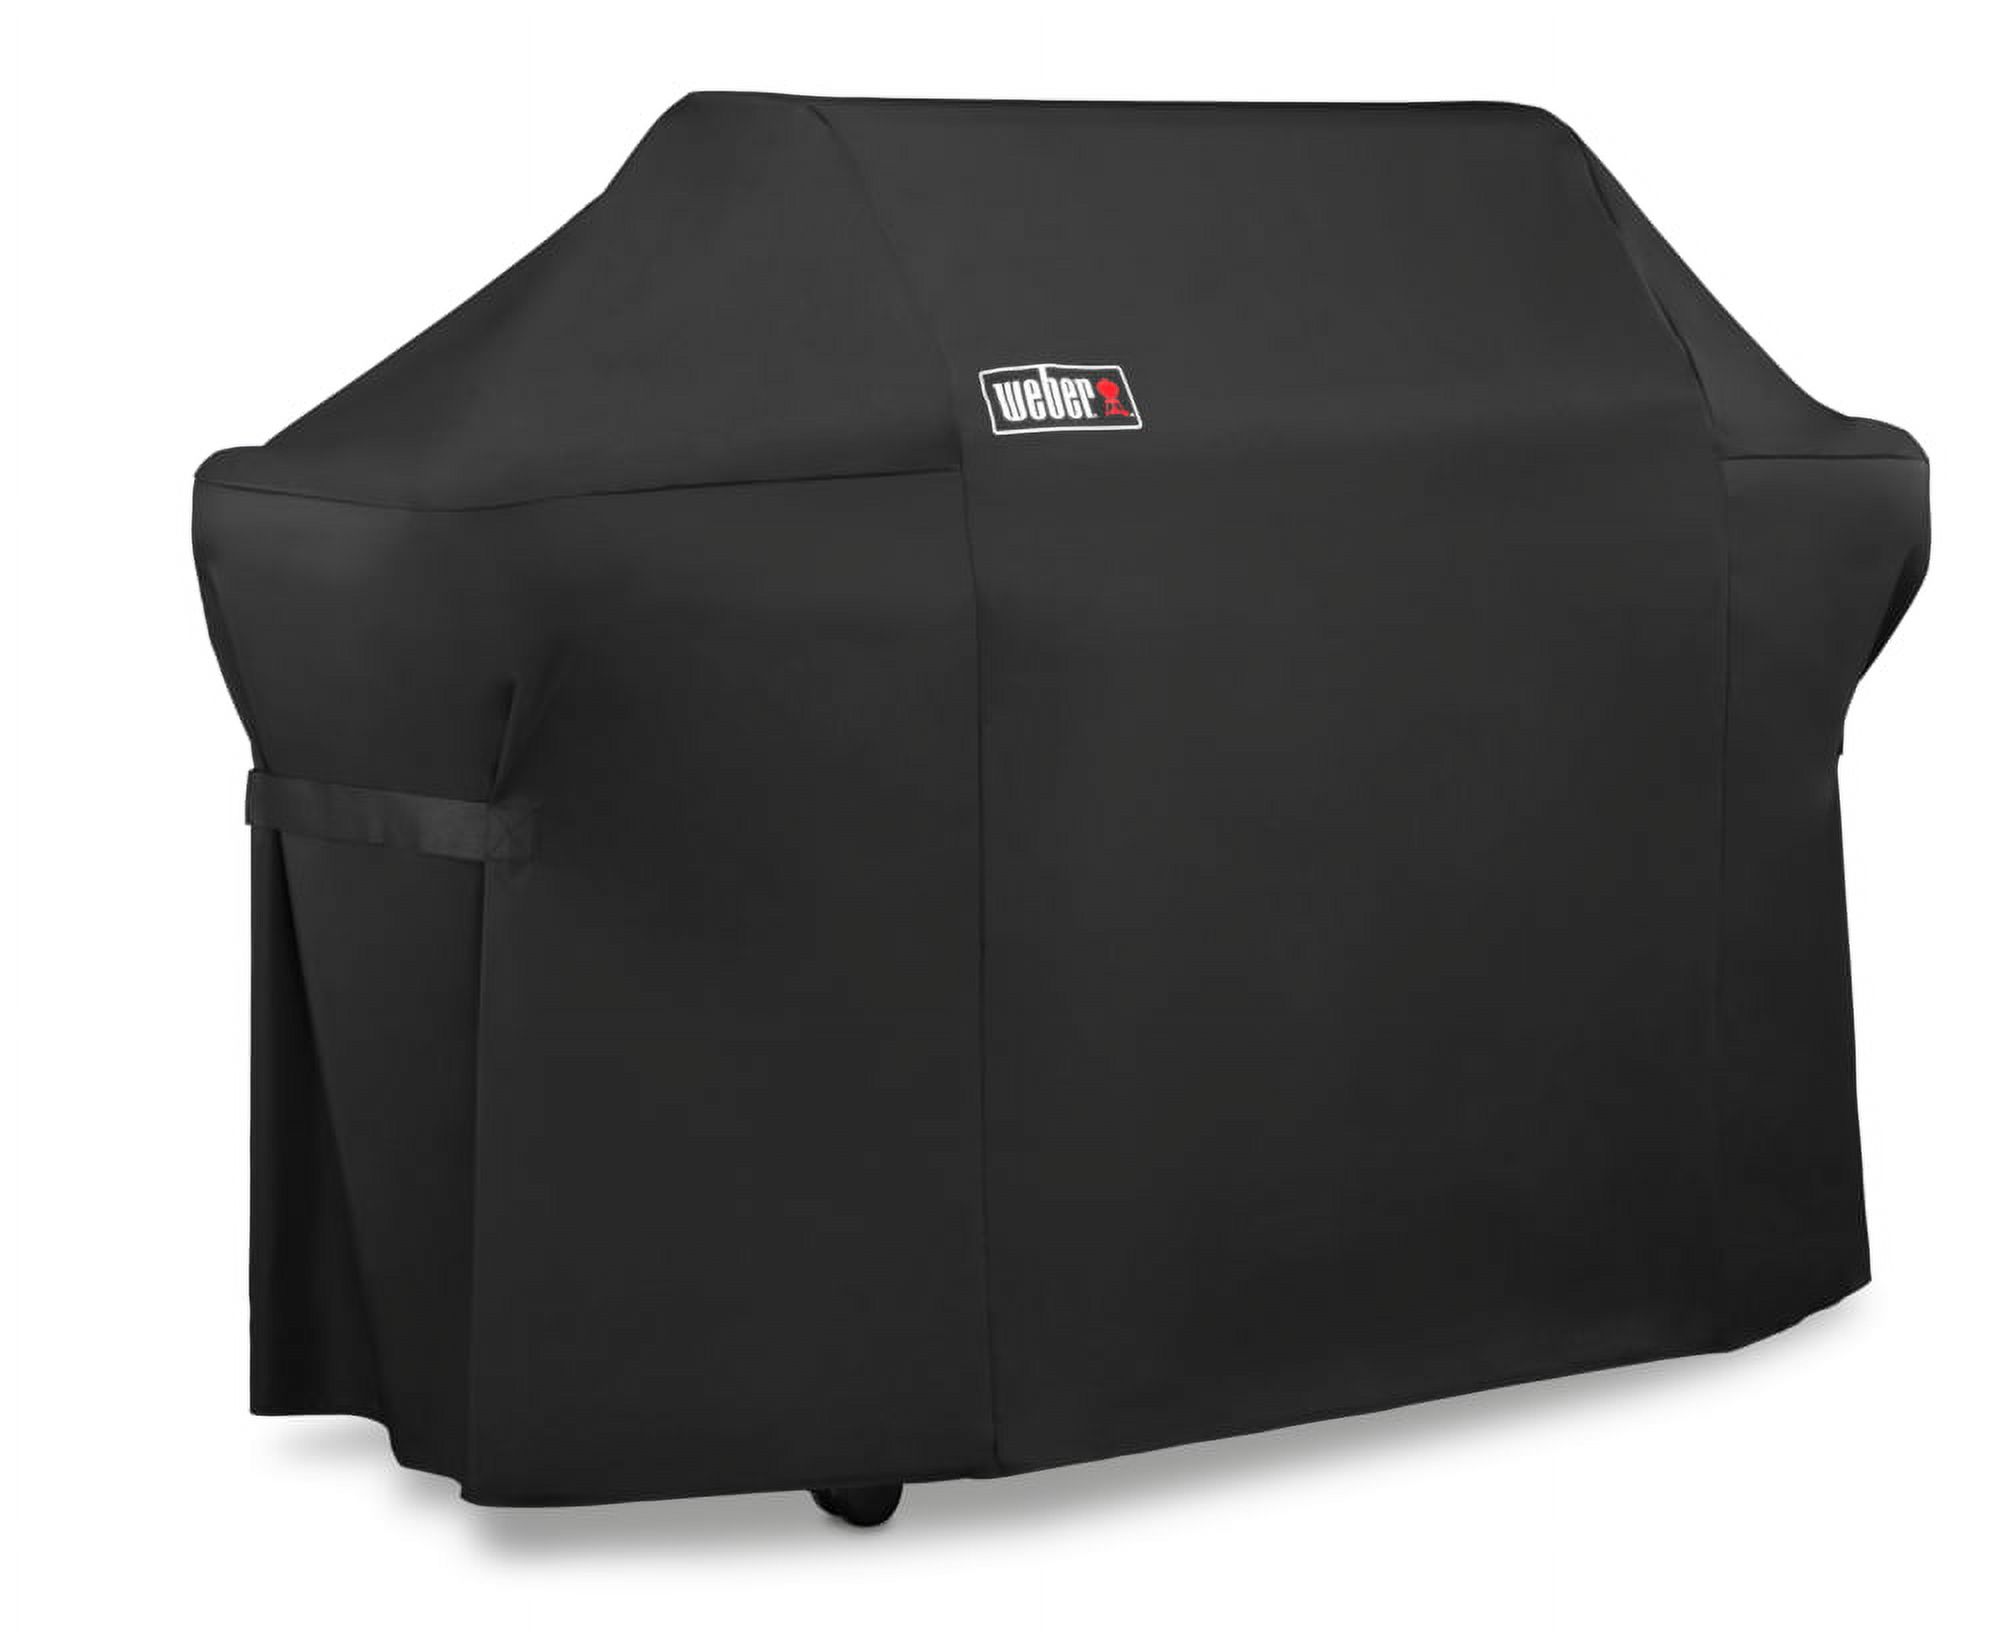 Weber Summit 600 Series Premium Grill Cover - image 2 of 8